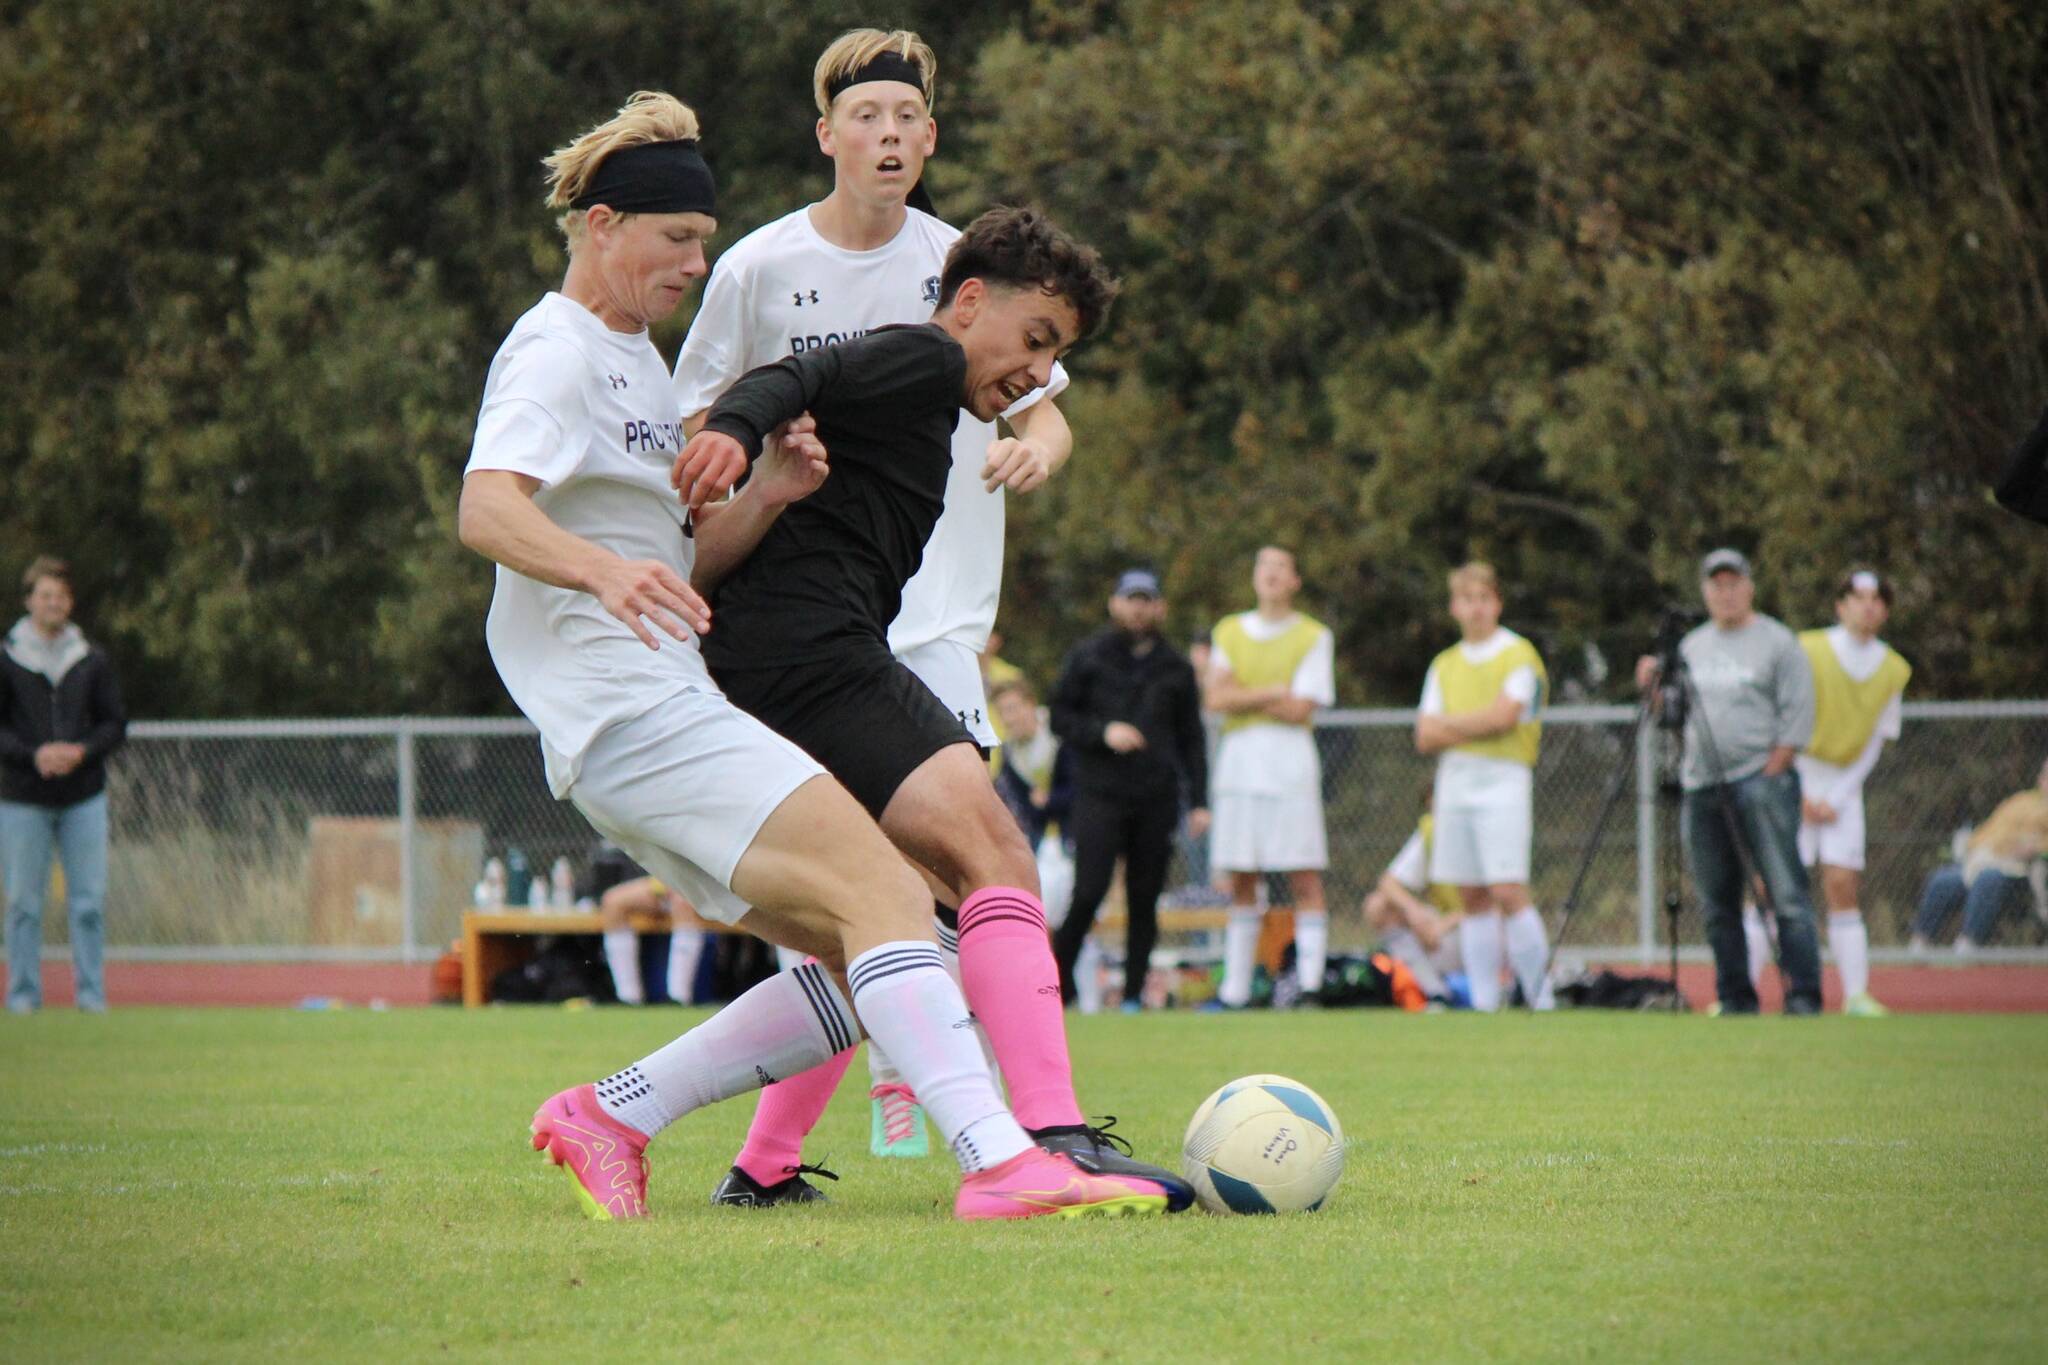 Corey Wiscomb photo.
Joaquin Shanks Morales defends the ball against Providence.